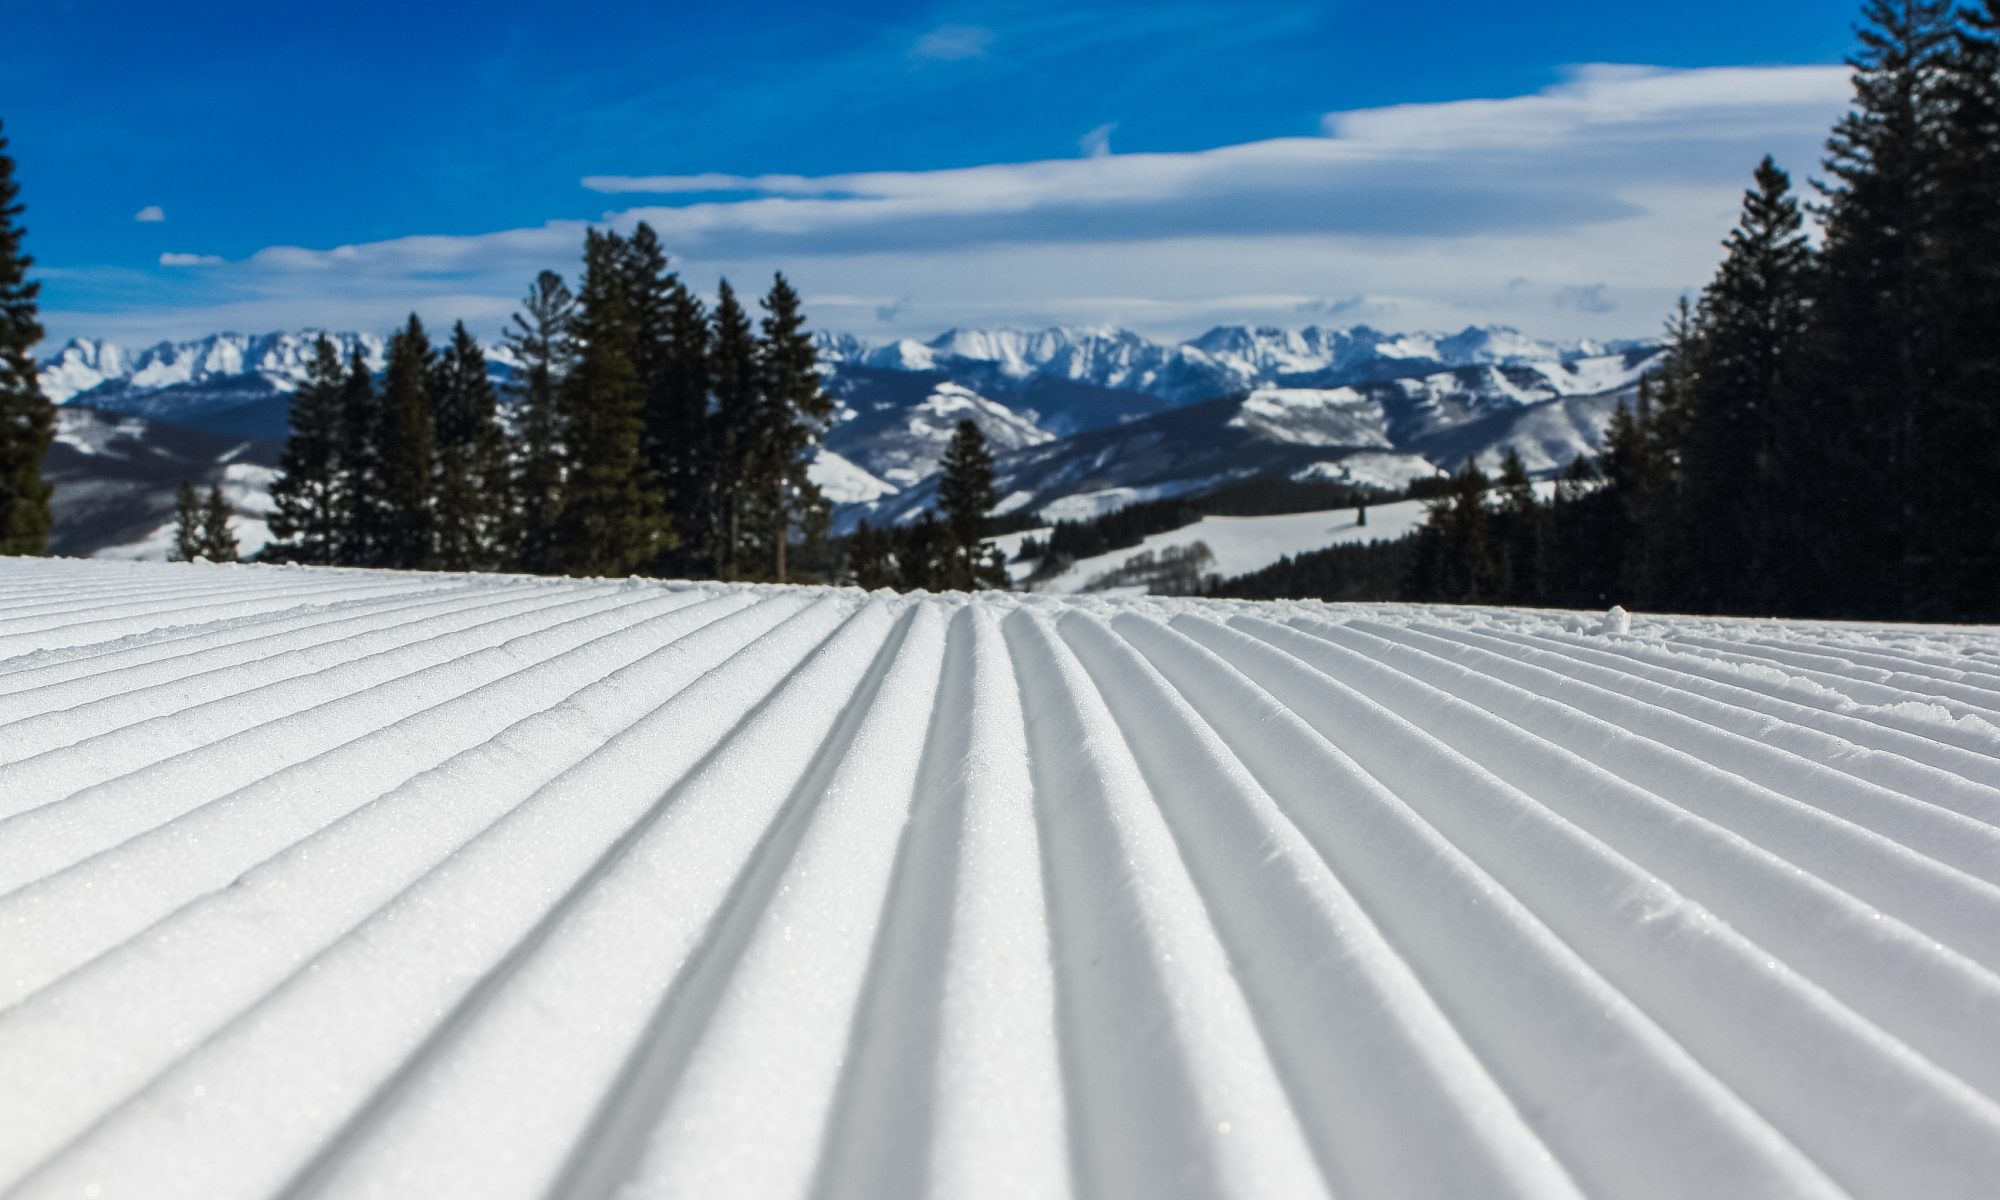 Snow Groomed. Photo by John Price. Unsplash. How can we envision ski resorts opening with social distancing for the 2020-21 ski season?